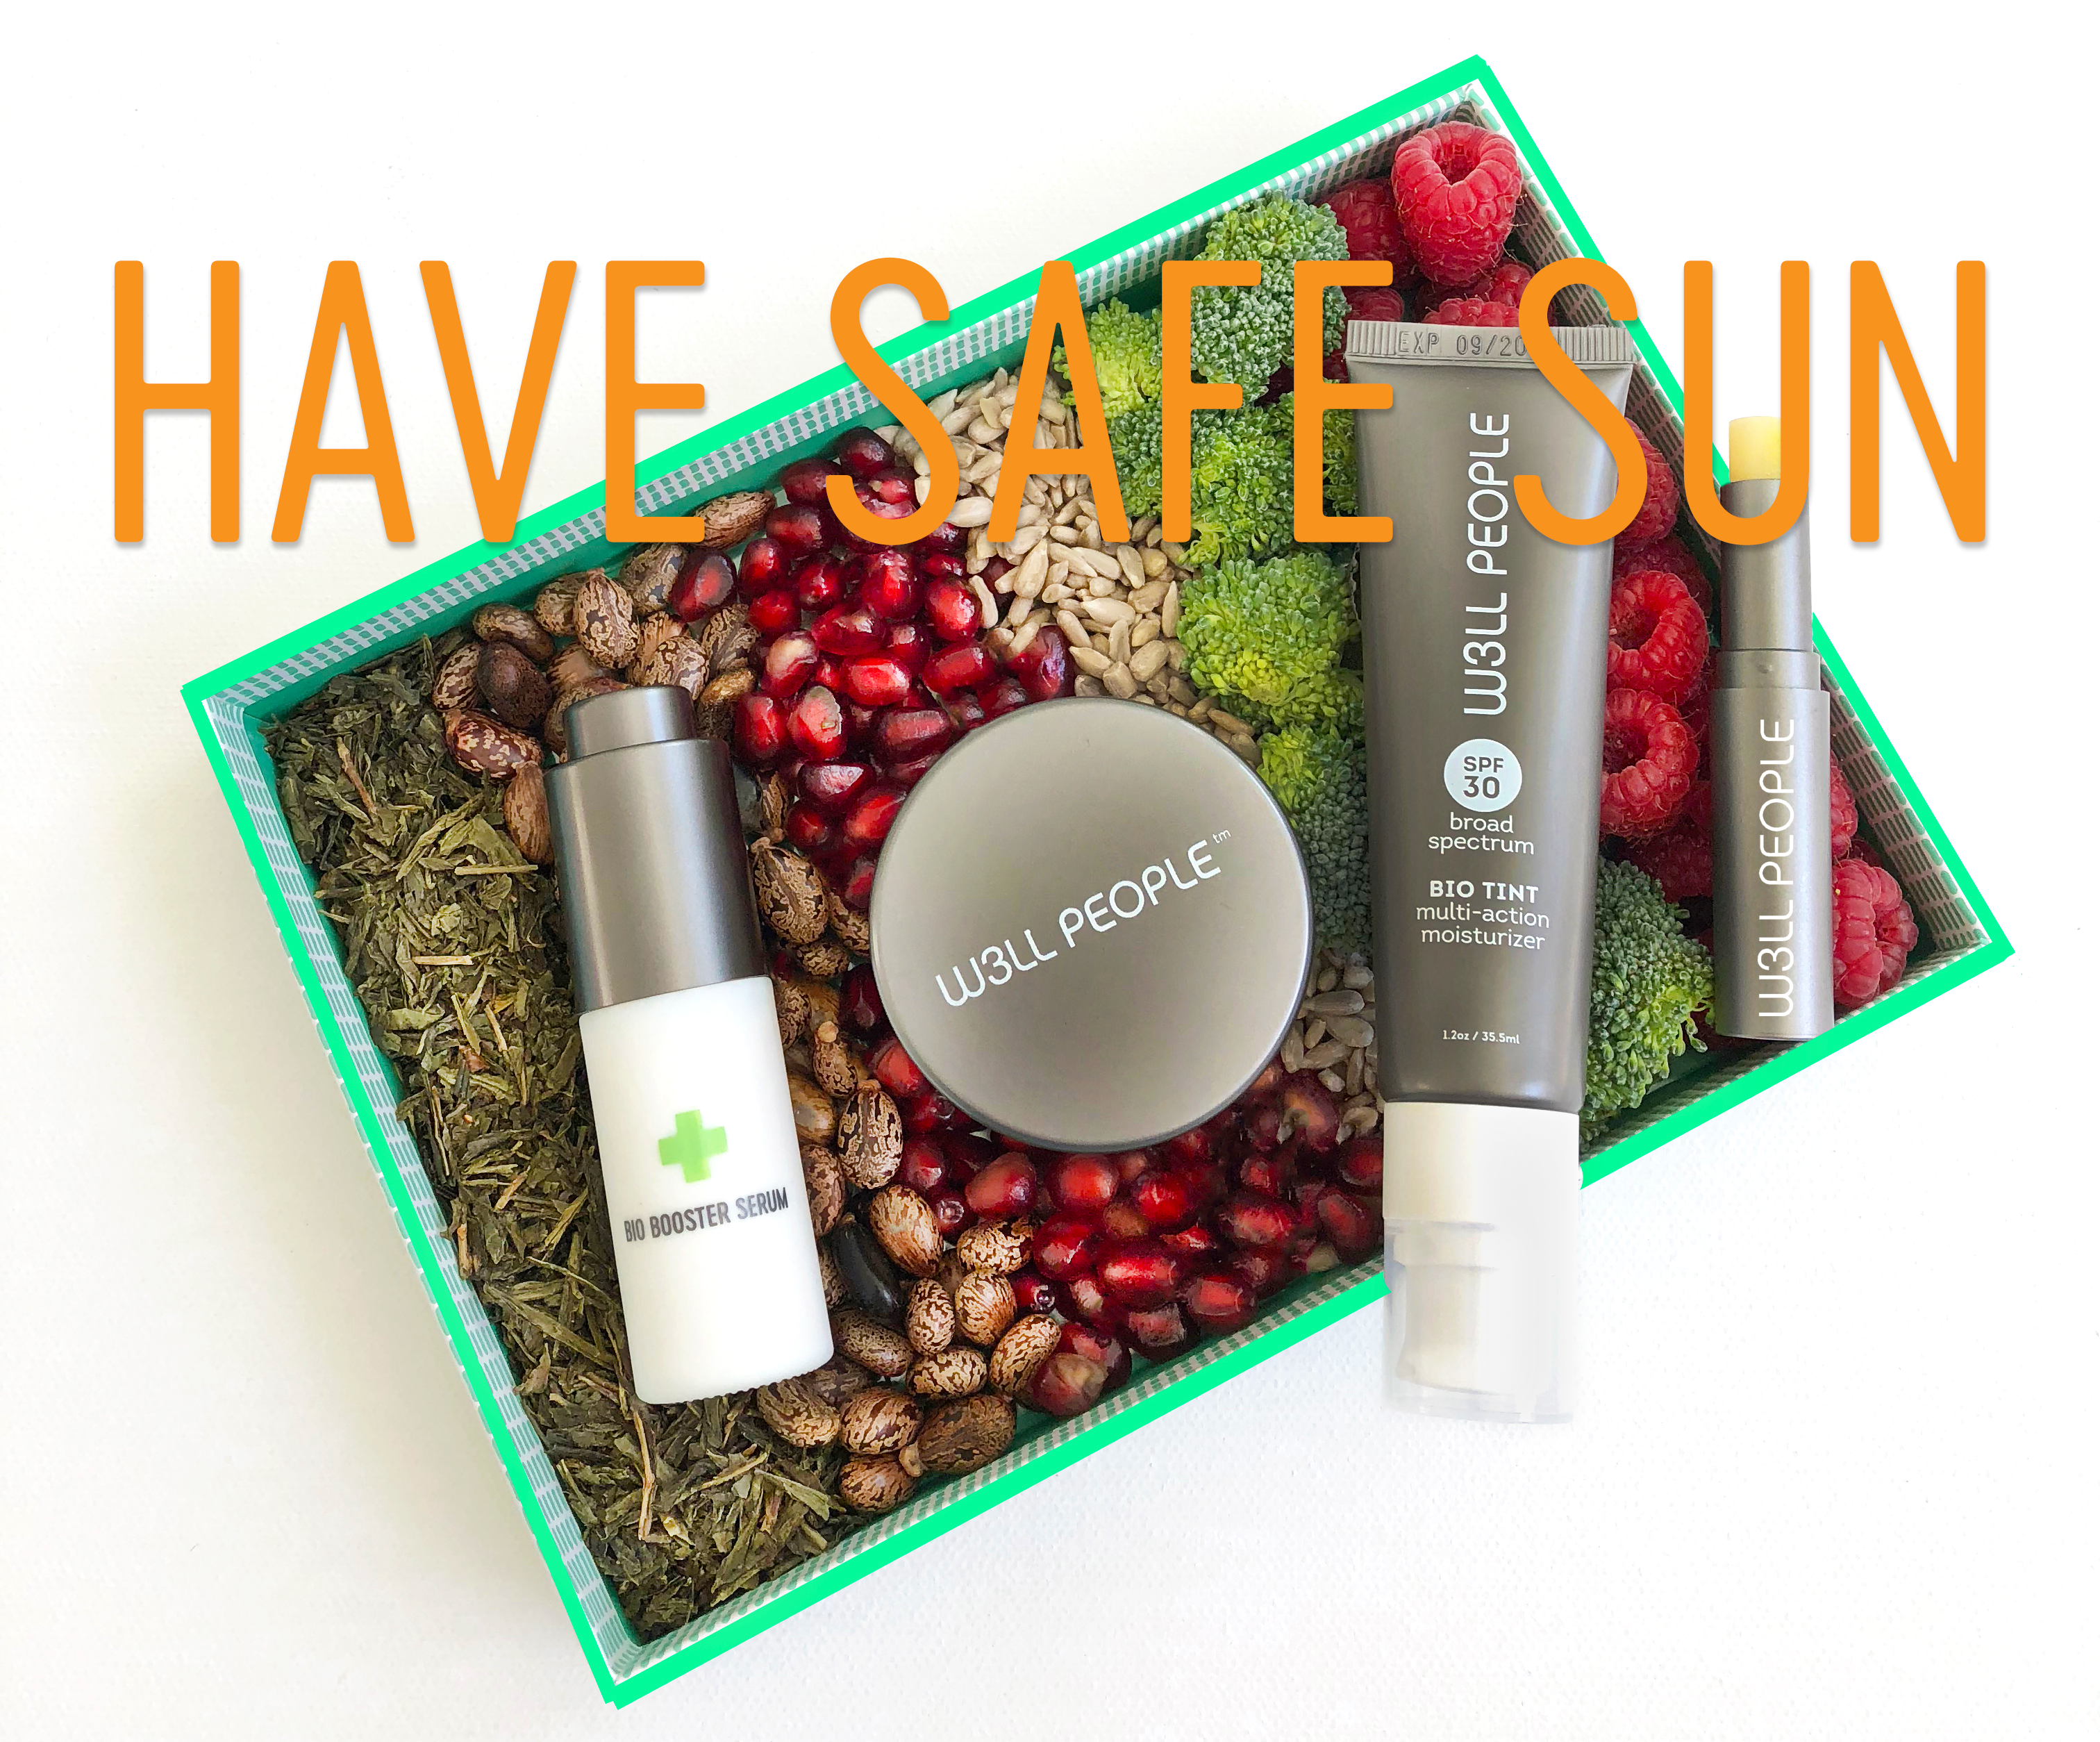 Have Safe Sun: The latest in chemical free SPF by W3LL PEOPLE